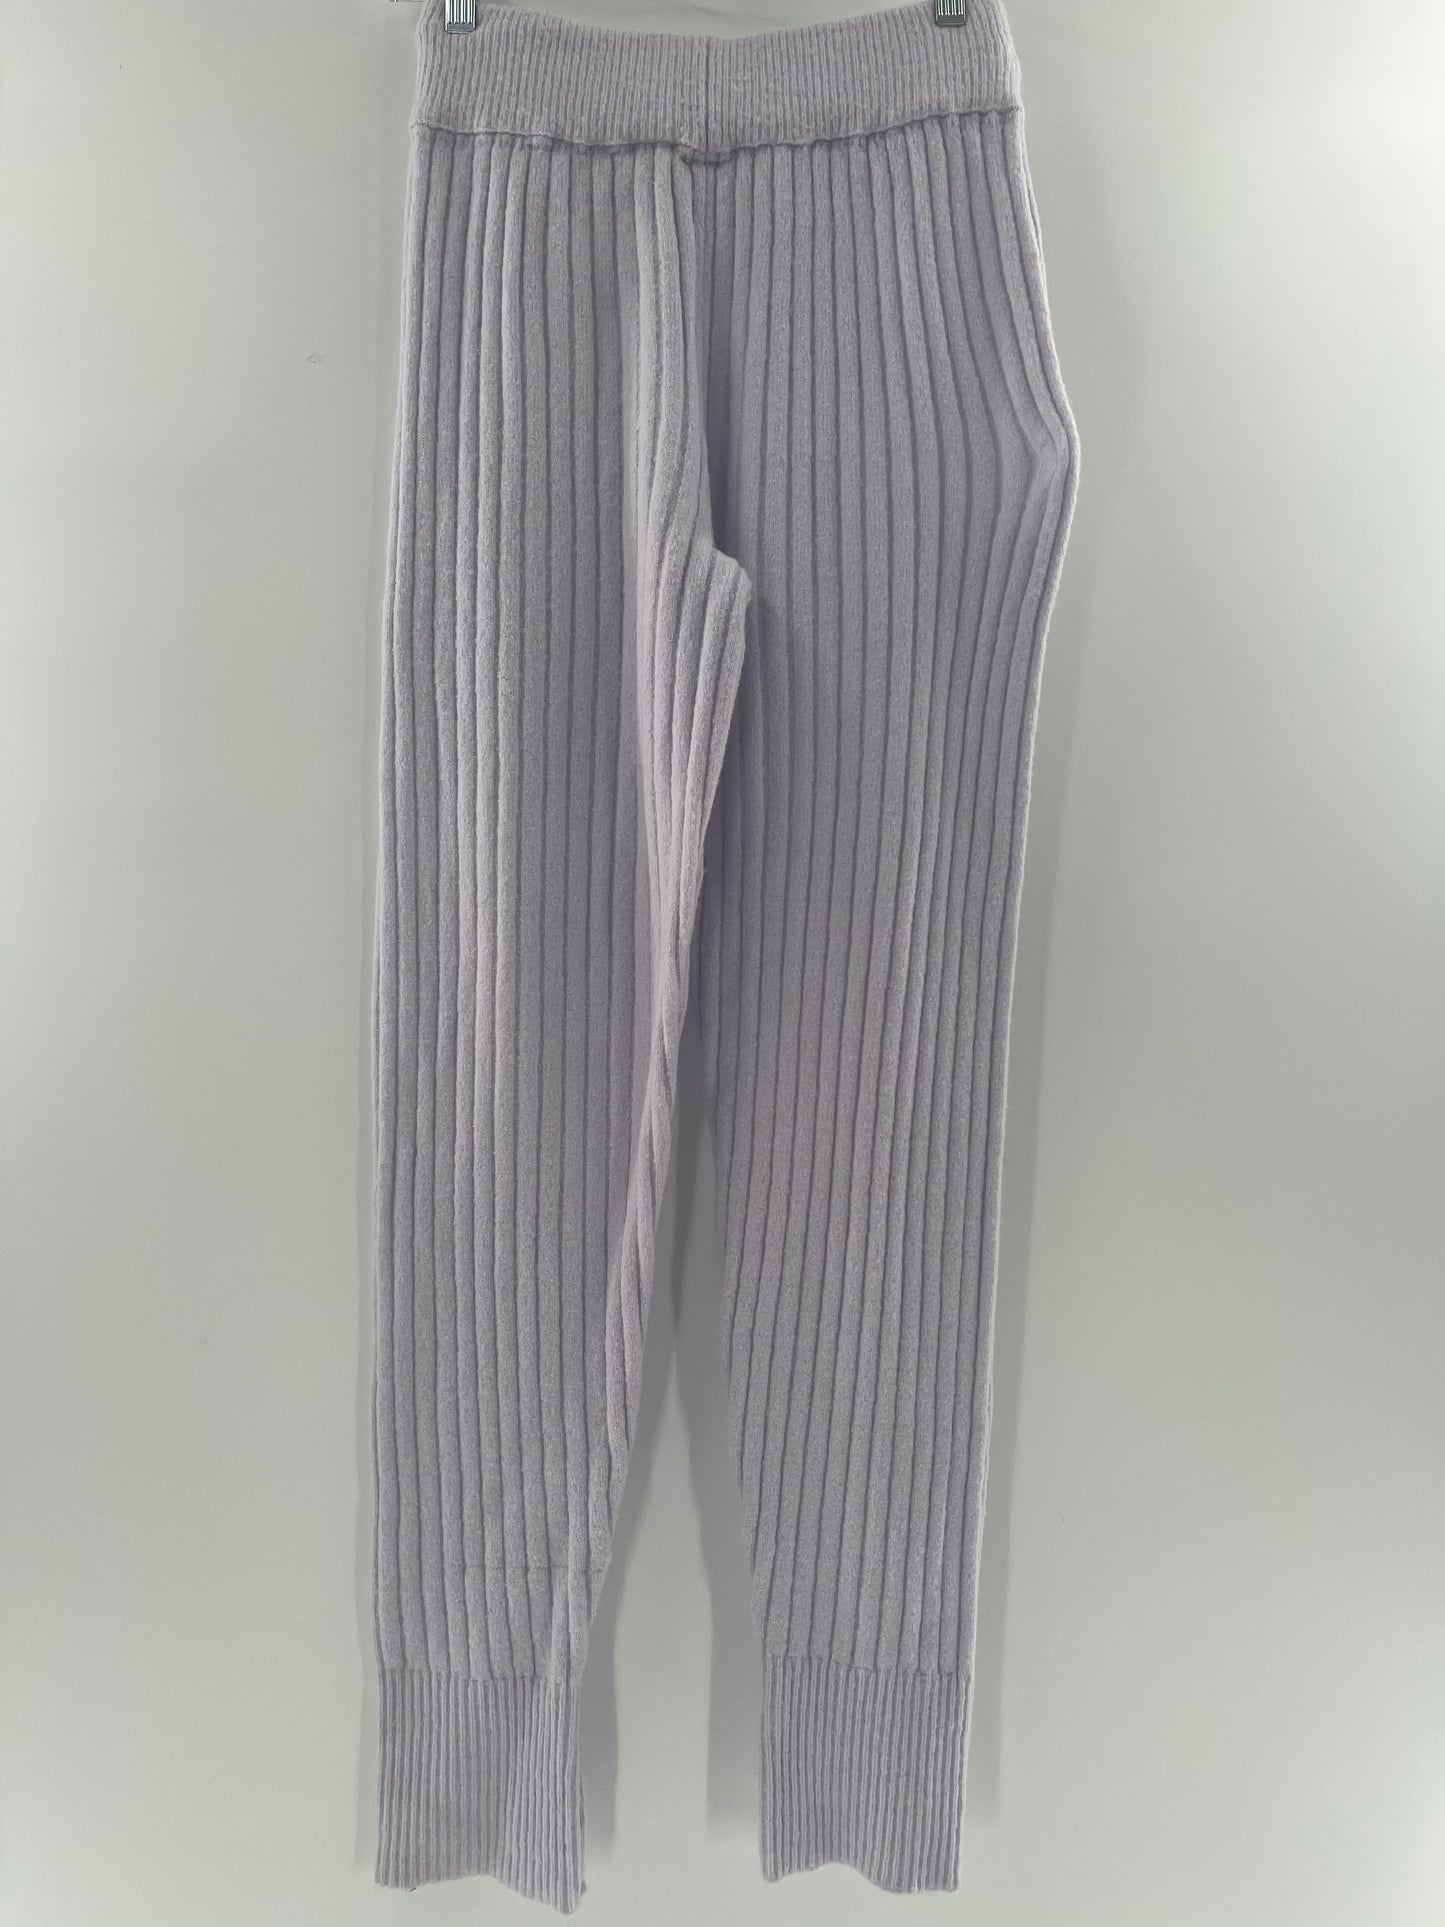 Intimately Free People Lilac Ribbed Joggers (Size S)